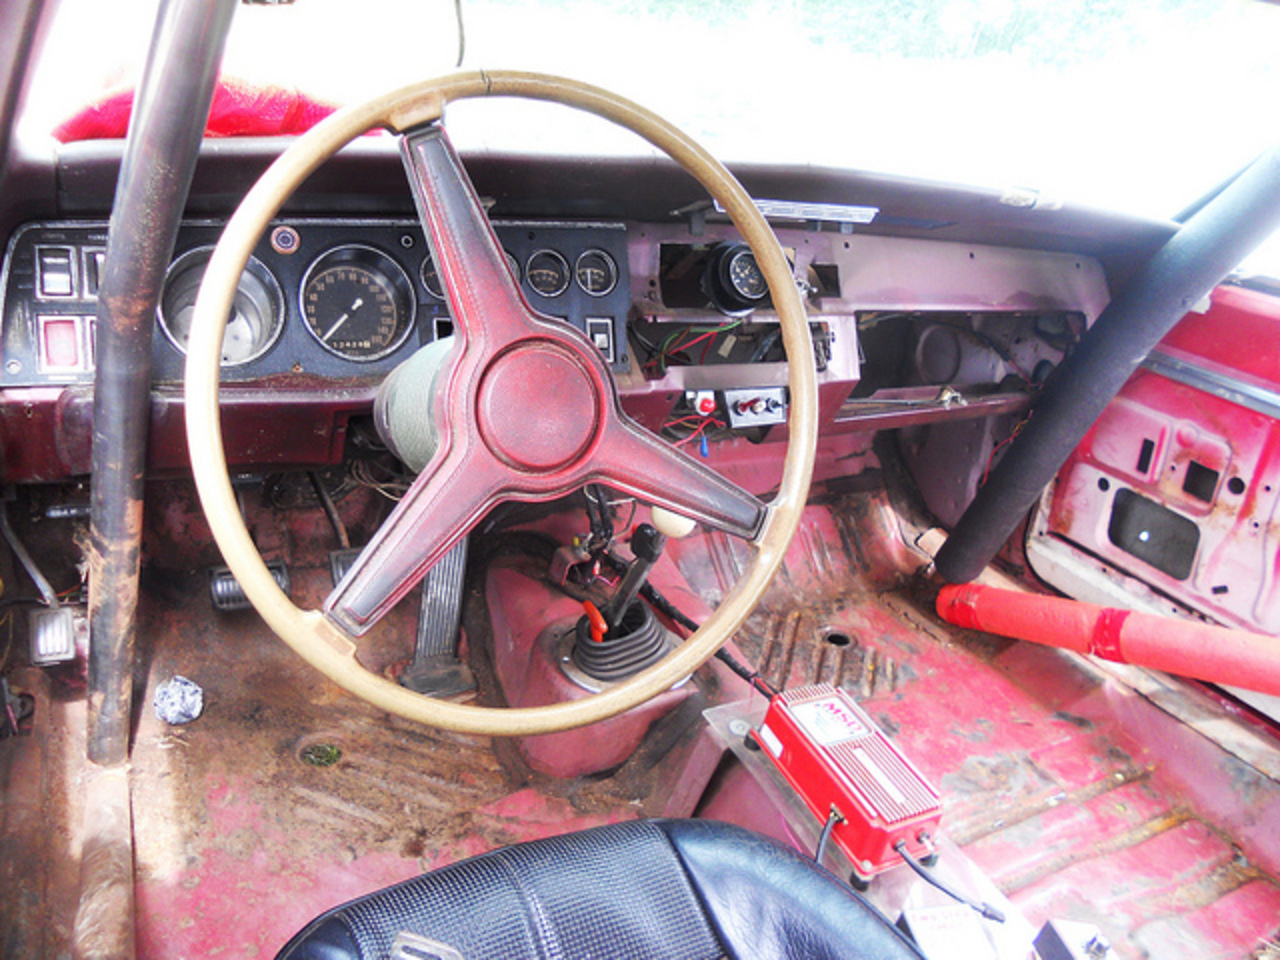 Flickr: The Custom car interiors - Classic and Vintage Pool